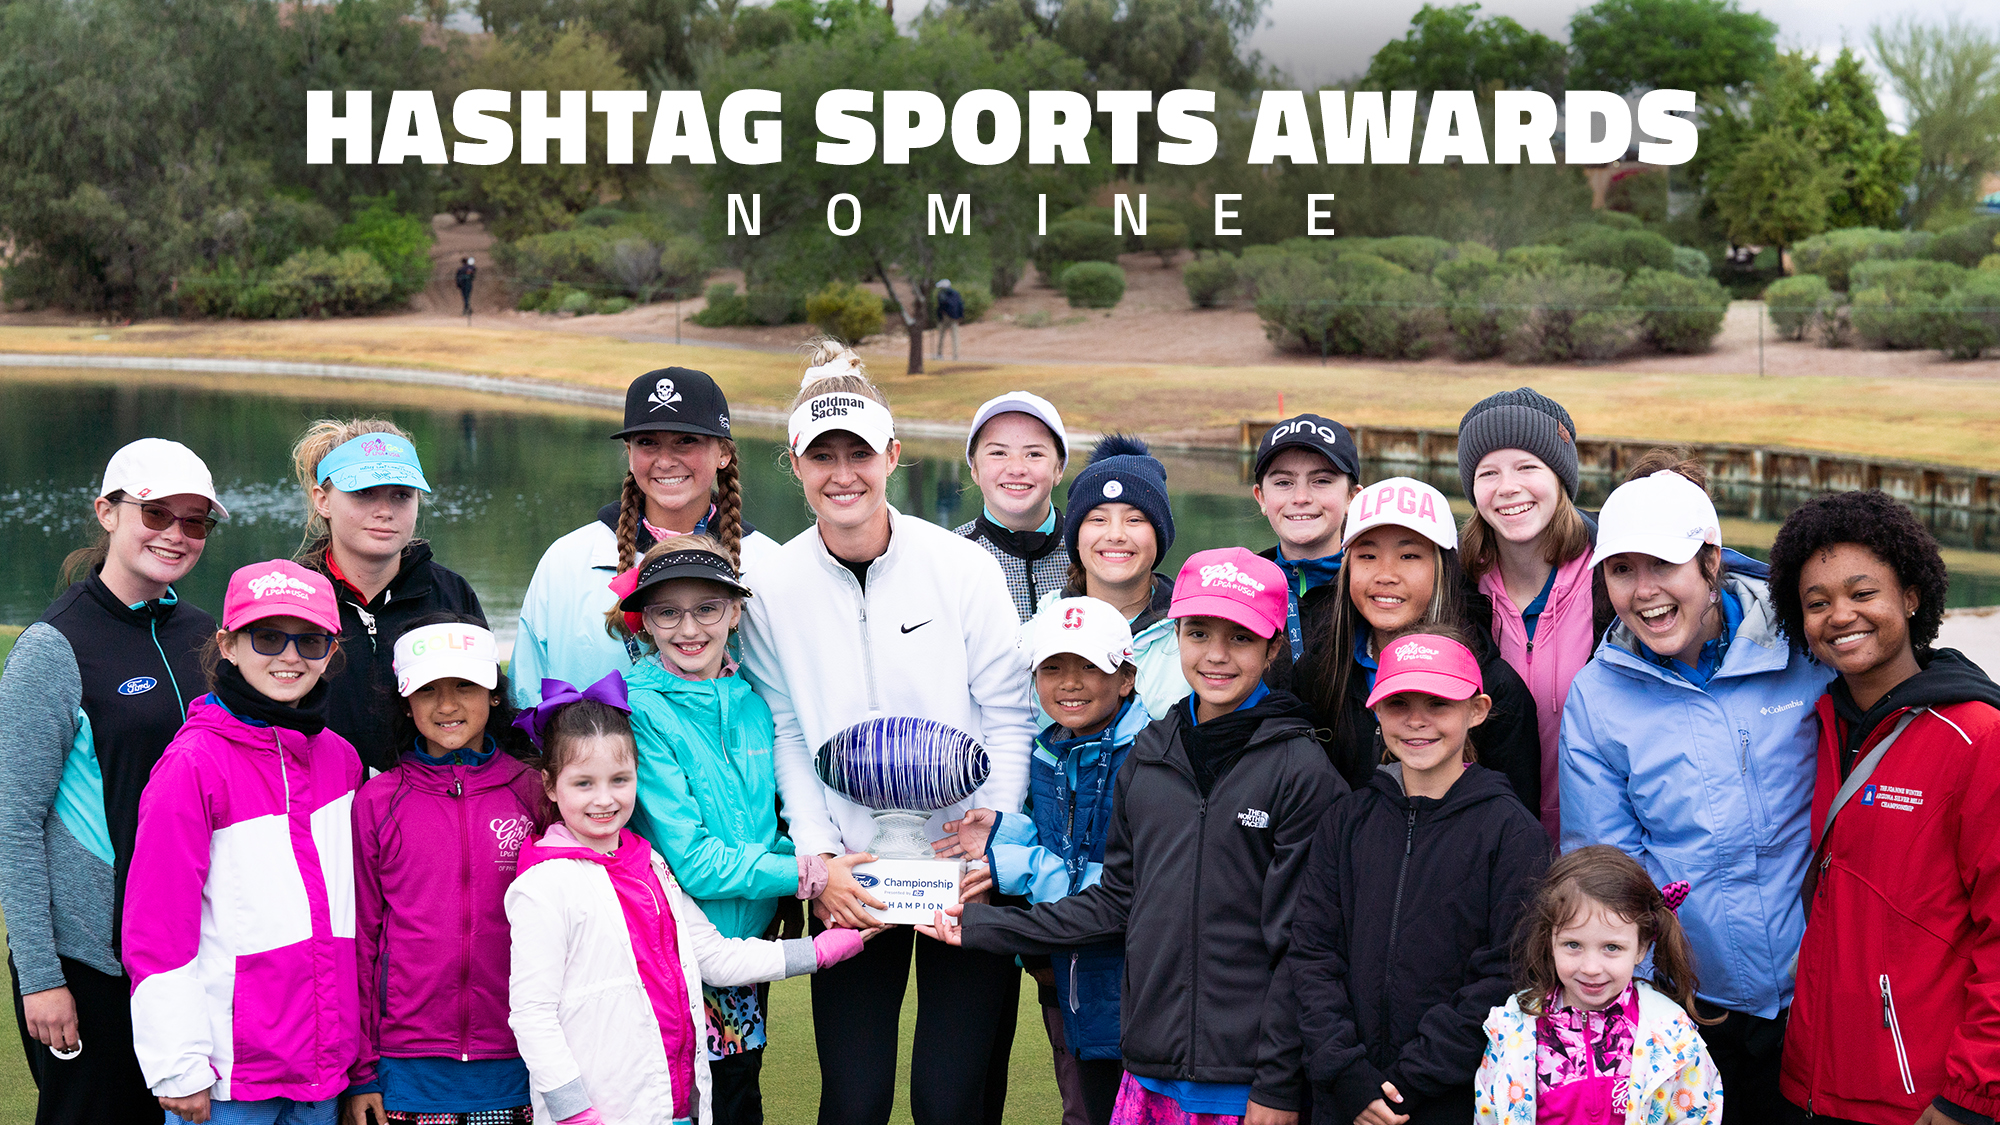 LPGA Receives Shortlist Nominations in Five Categories for 2024 Hashtag Sports Awards